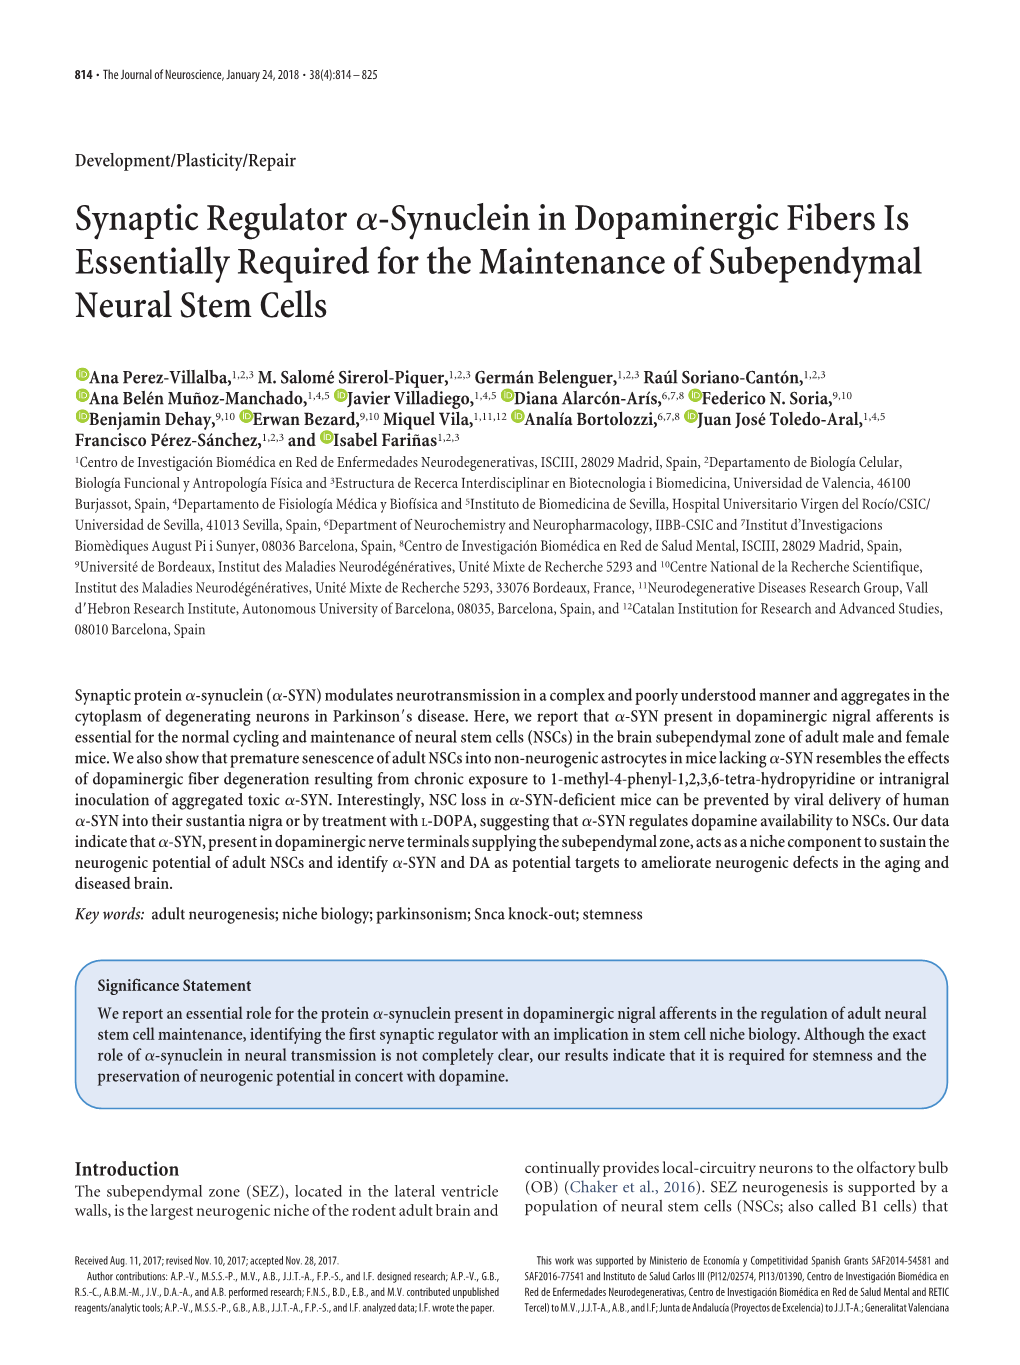 Synaptic Regulator Α-Synuclein in Dopaminergic Fibers Is Essentially Required for the Maintenance of Subependymal Neural Stem C